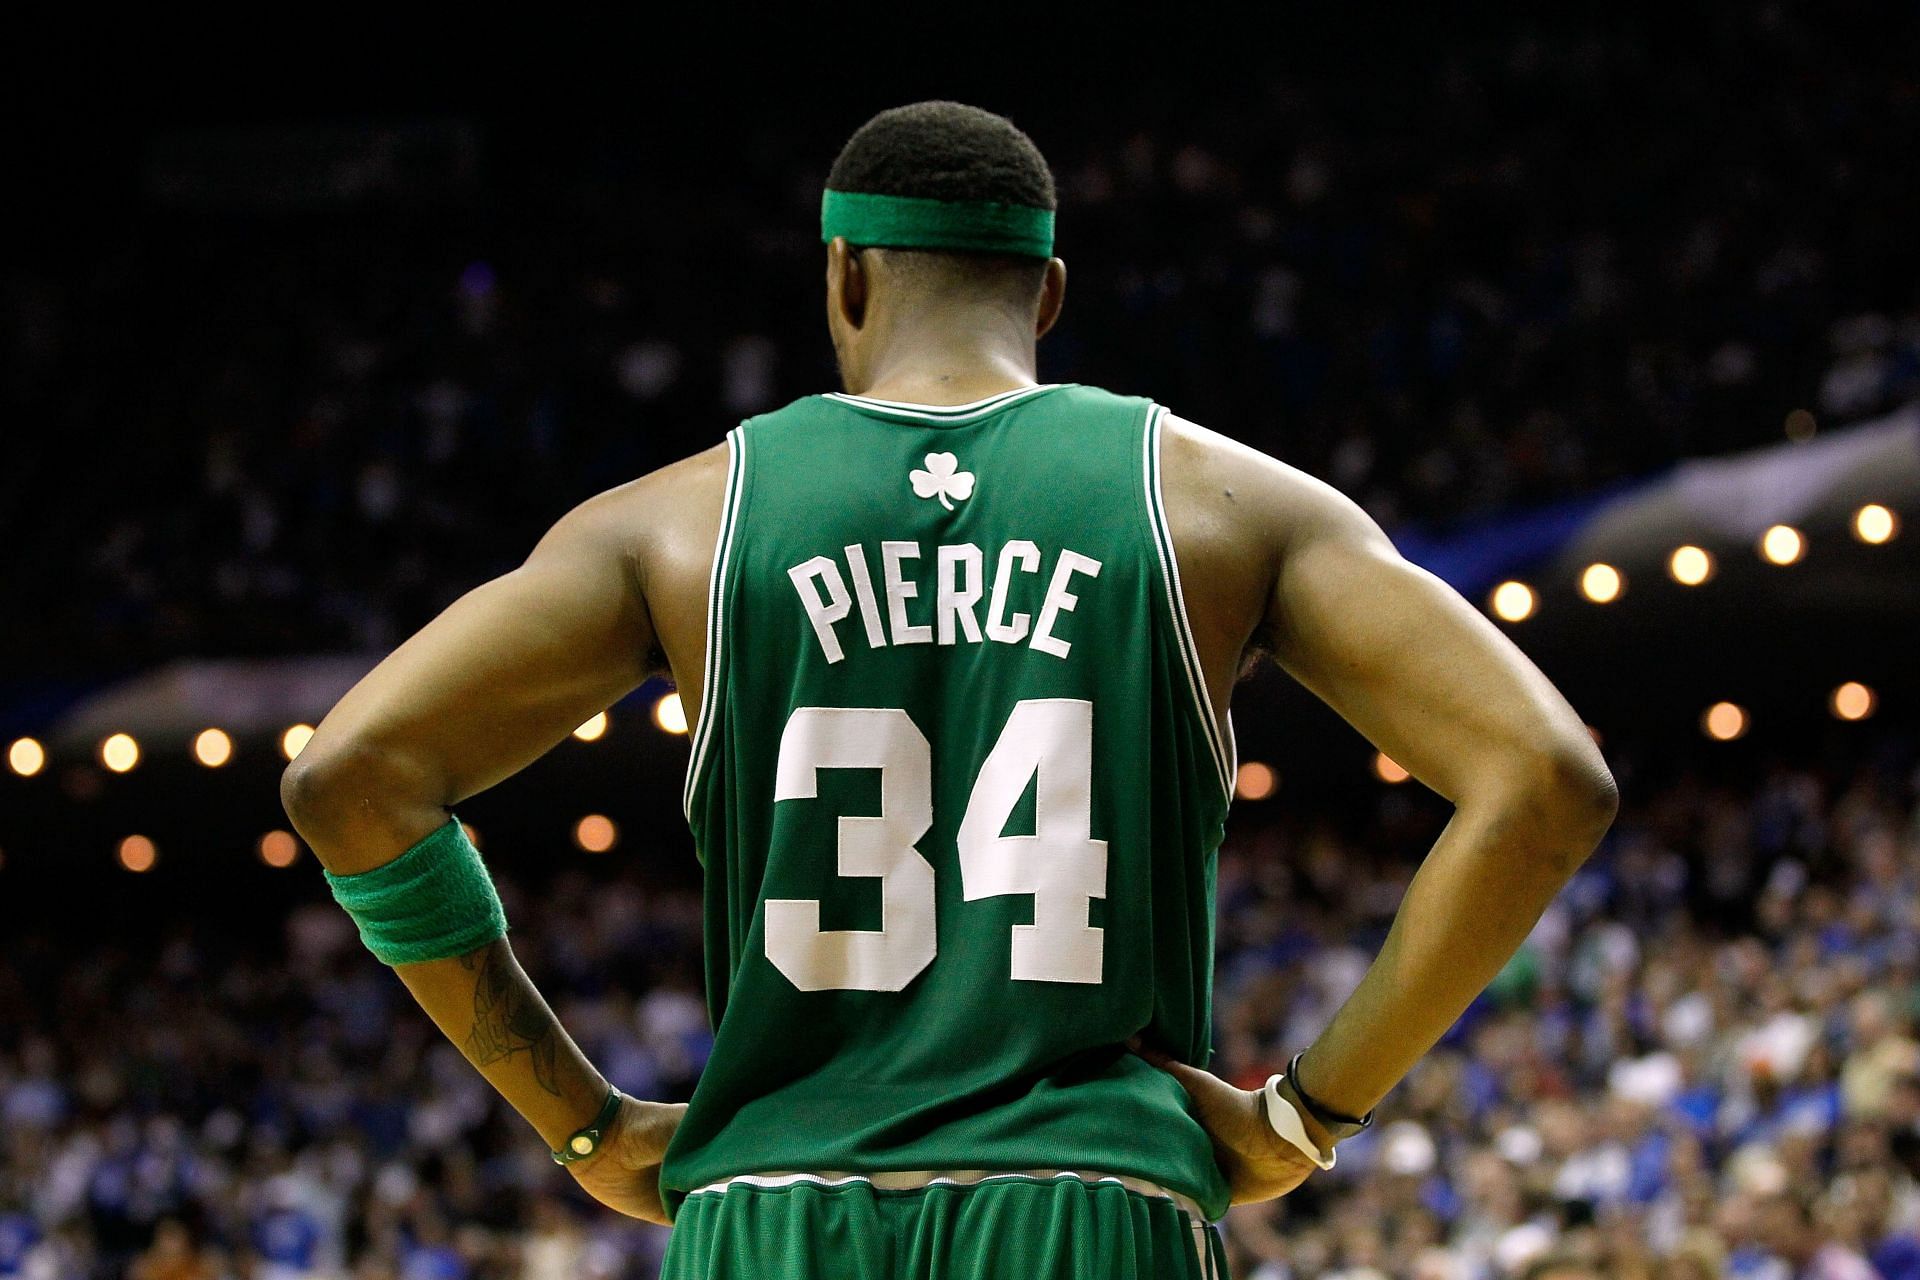 Paul Pierce was one of the greatest players in the Boston Celtics history.